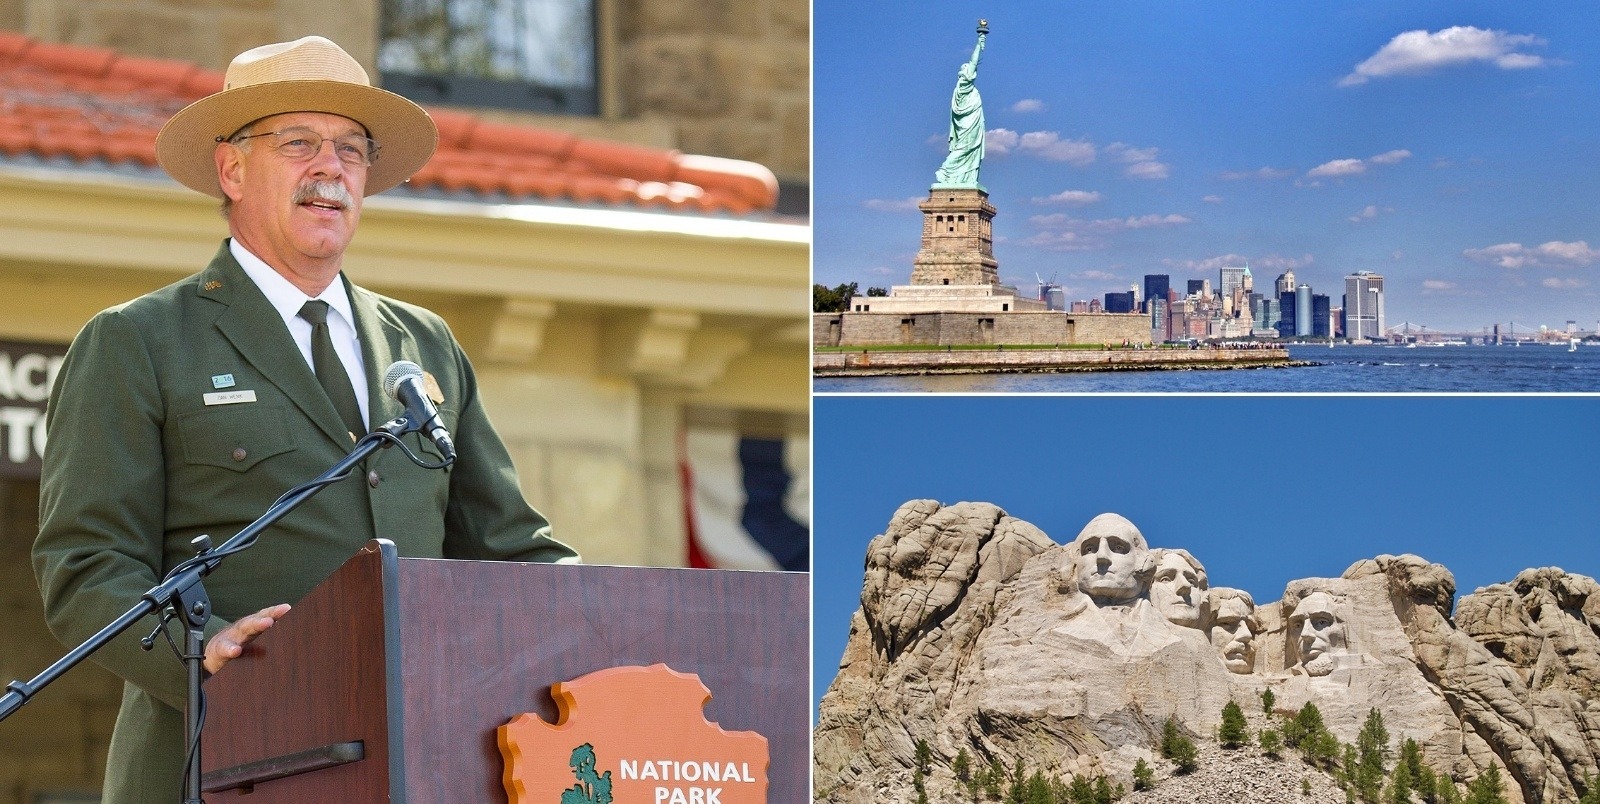 During Wenk's tenure, in addition to being at the helm of Yellowstone, he oversaw major restoration of both the Statue of Liberty and Mount Rushmore, two of the most iconic landmarks of American patriotism. Photos courtesy NPS.  Mount Rushmore photo courtesy Flickr user: Nick Amoscato